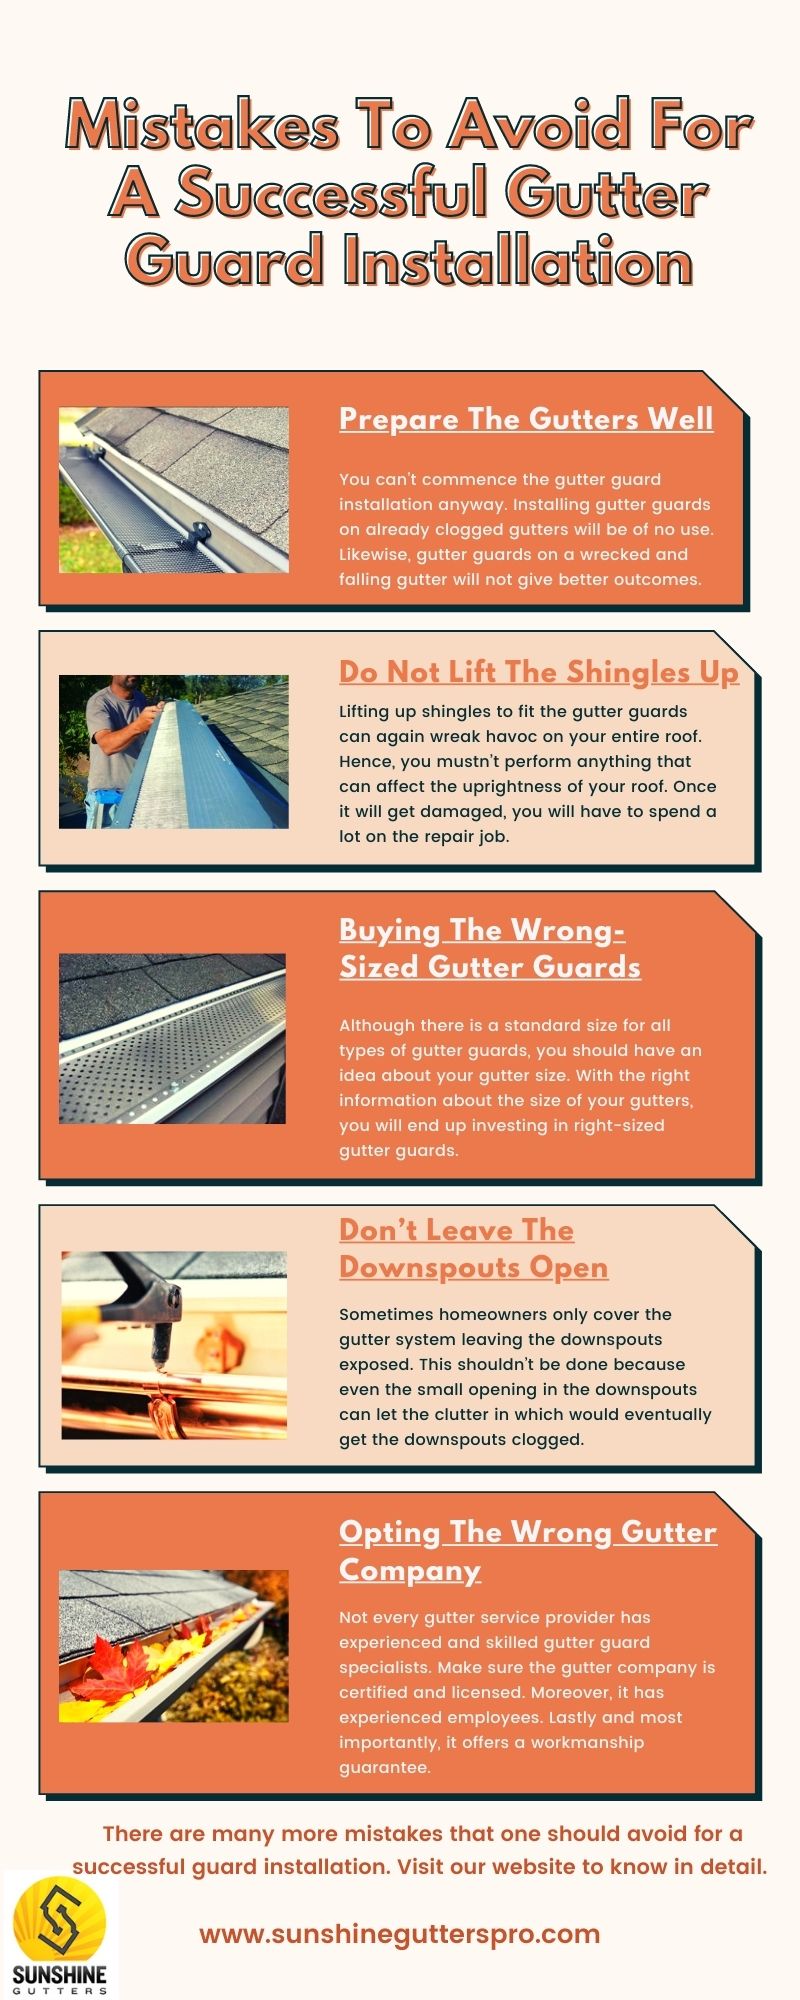 Mistakes To Avoid For A Successful Gutter Guard Installation